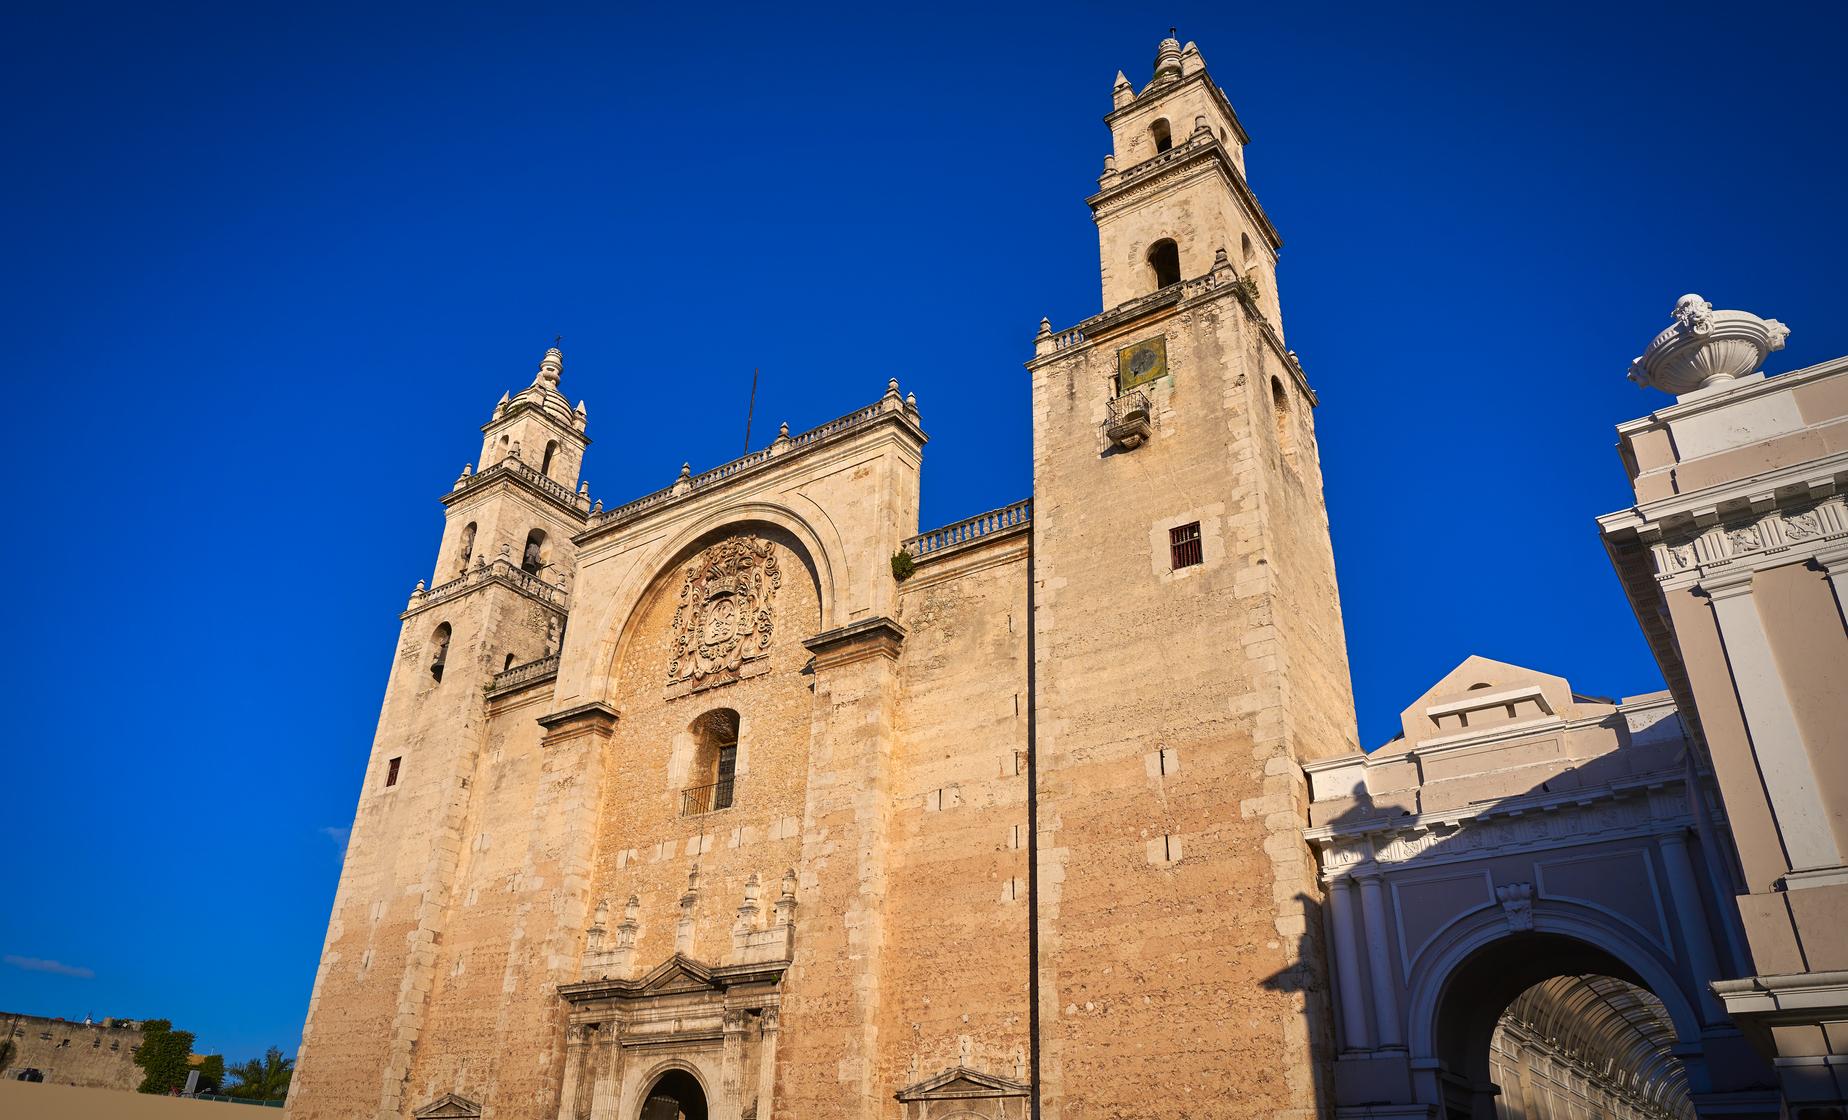 Private Historical Merida Tour from Progreso (Cathedral de San Ildefonso)